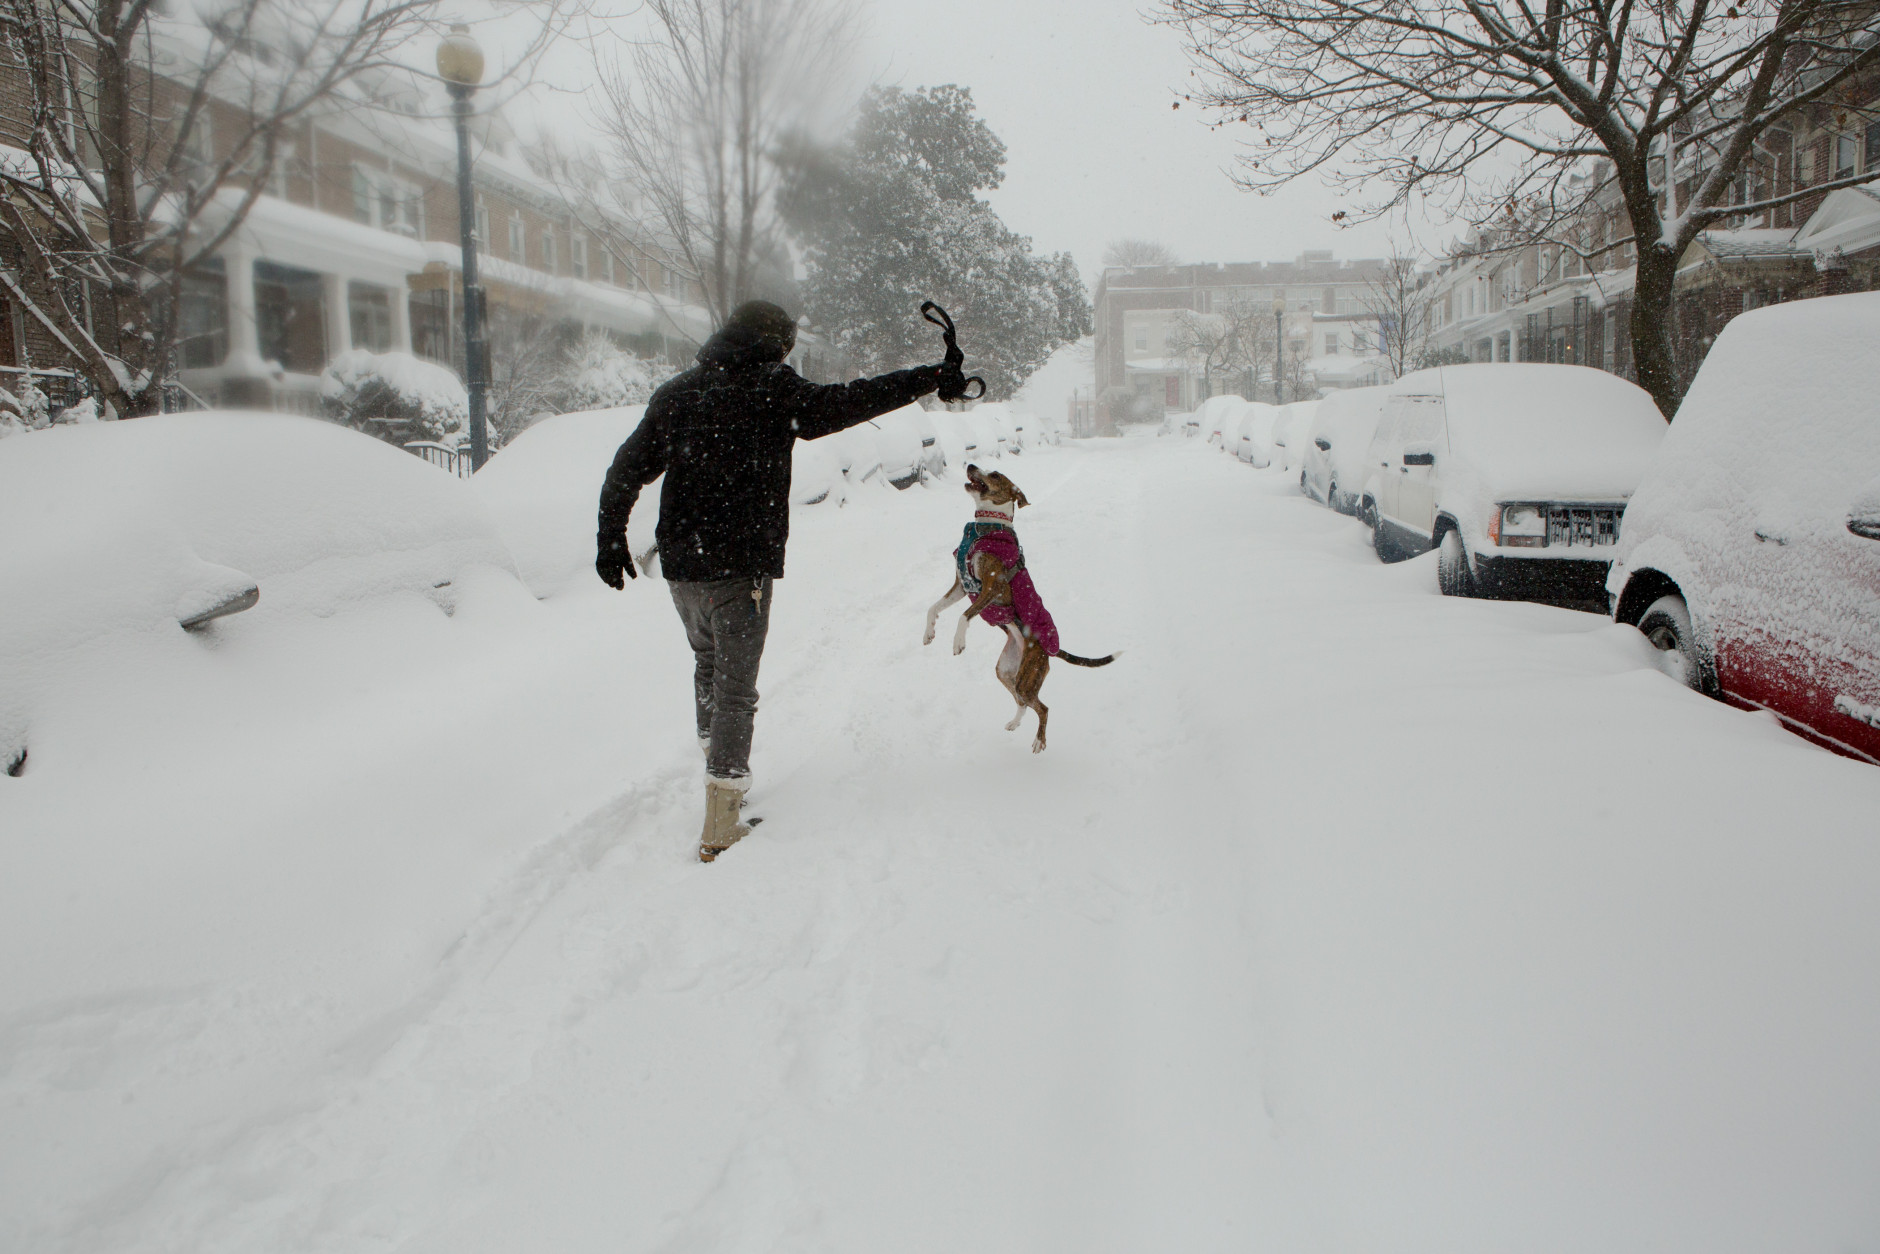 A man takes advantage of an unplowed street to play with his dog in the Parkview neighborhood on January 23, 2016 in Washington, DC. Over a foot of snow has already fallen in the city in the past 24 hours, in what experts say could be a record-breaking storm. (Photo by Allison Shelley/Getty Images)